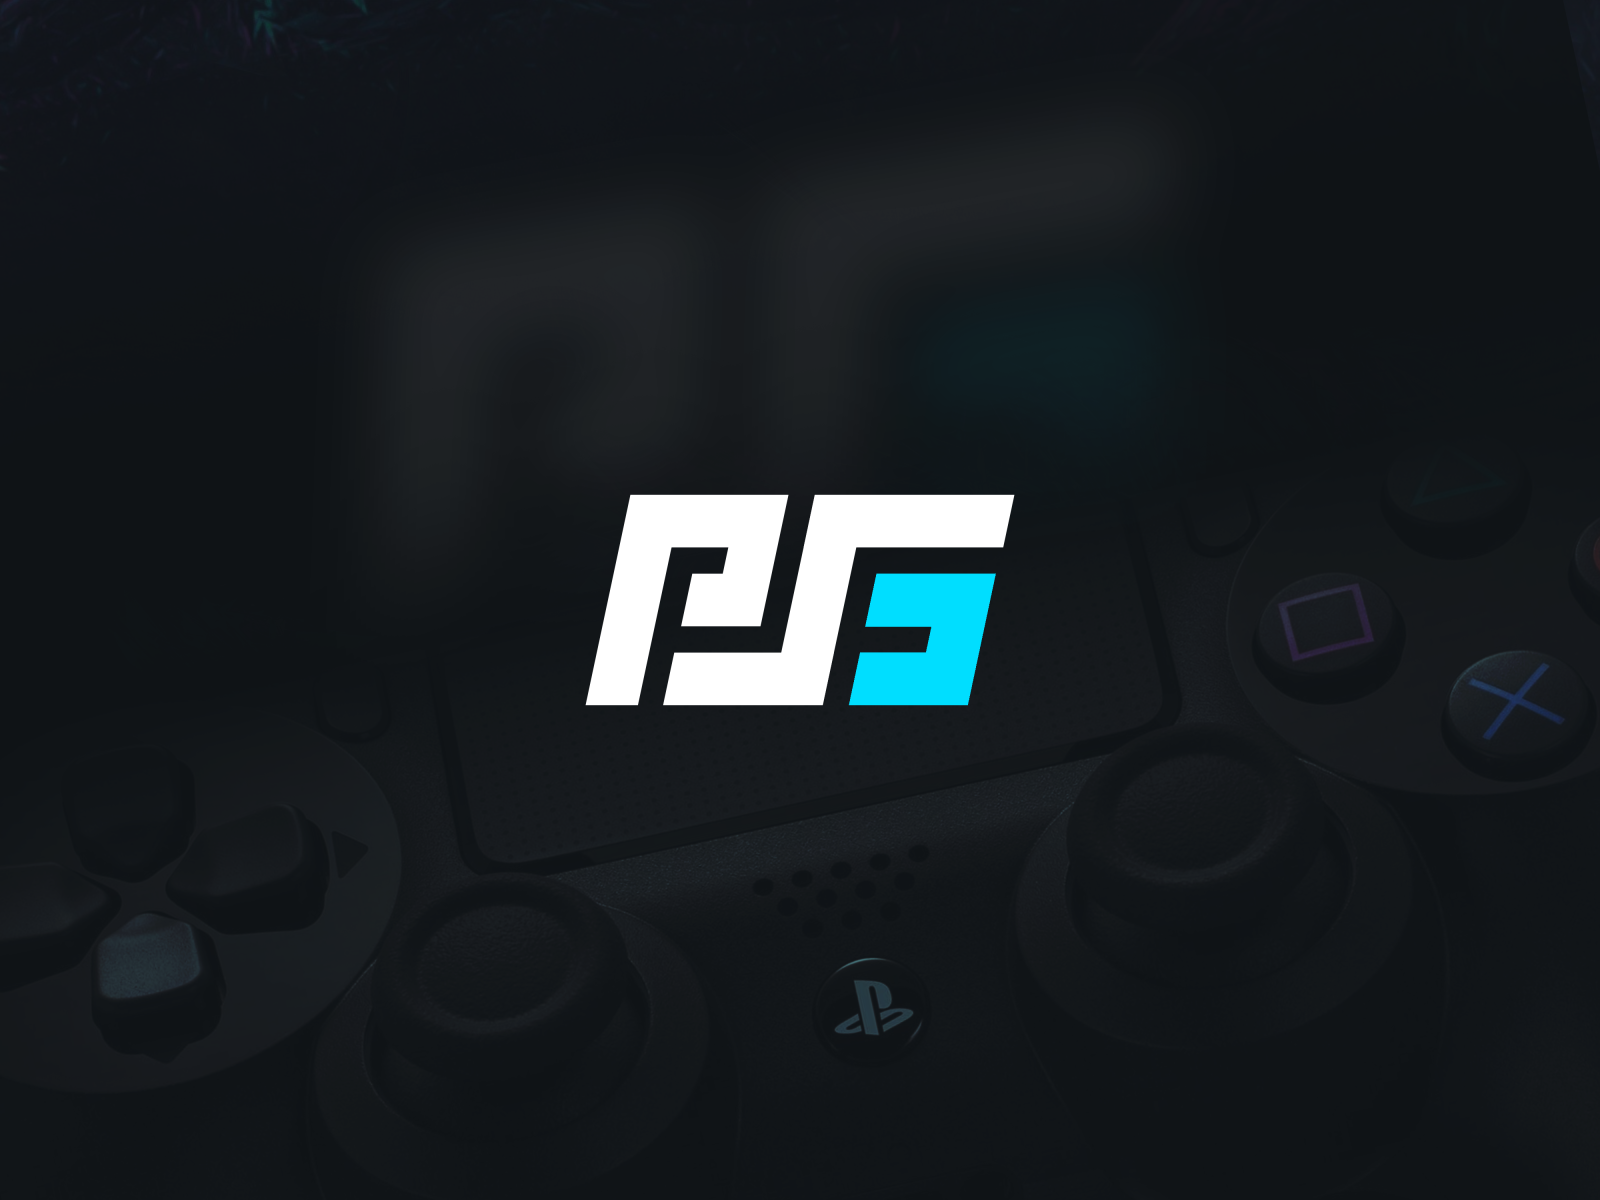 PS5 Concept Logo by VECTA on Dribbble